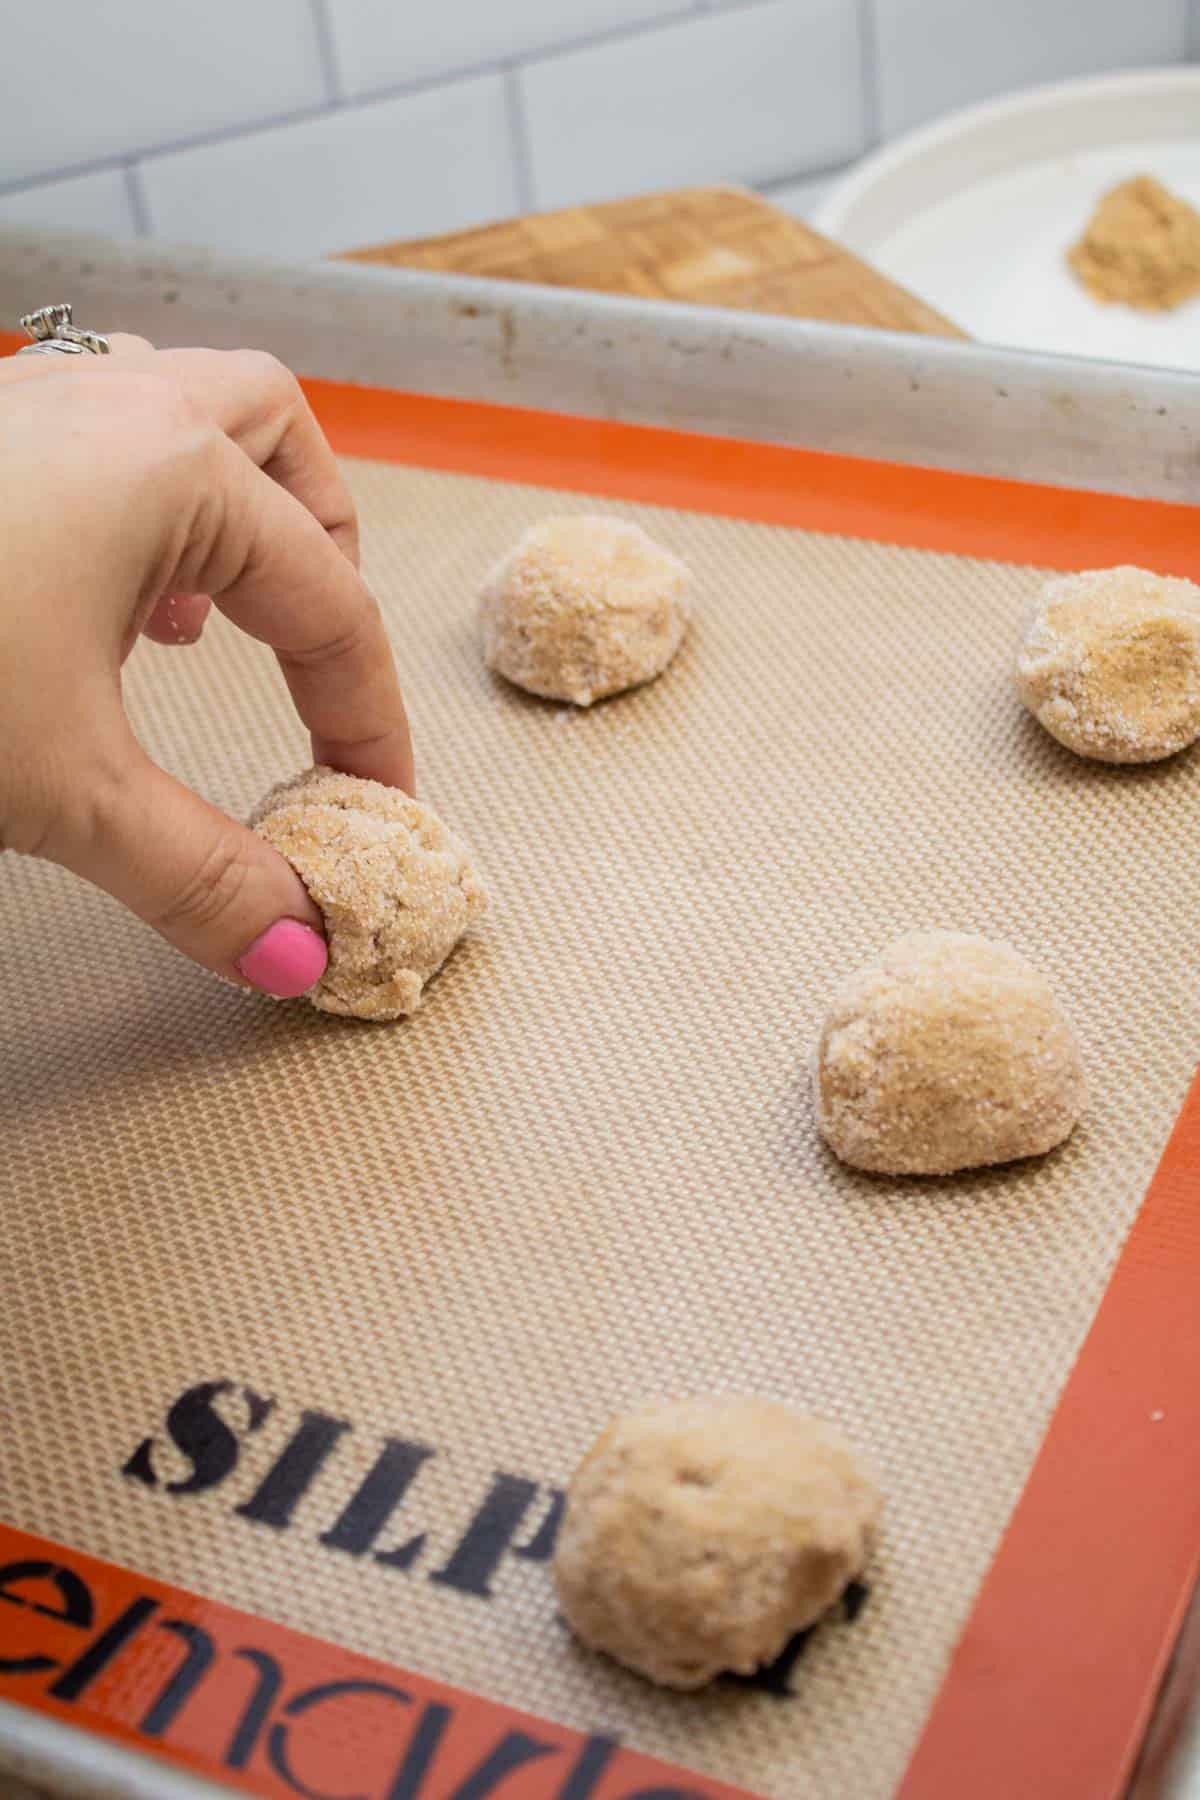 Placing maple cookie dough balls onto a lined baking sheet.